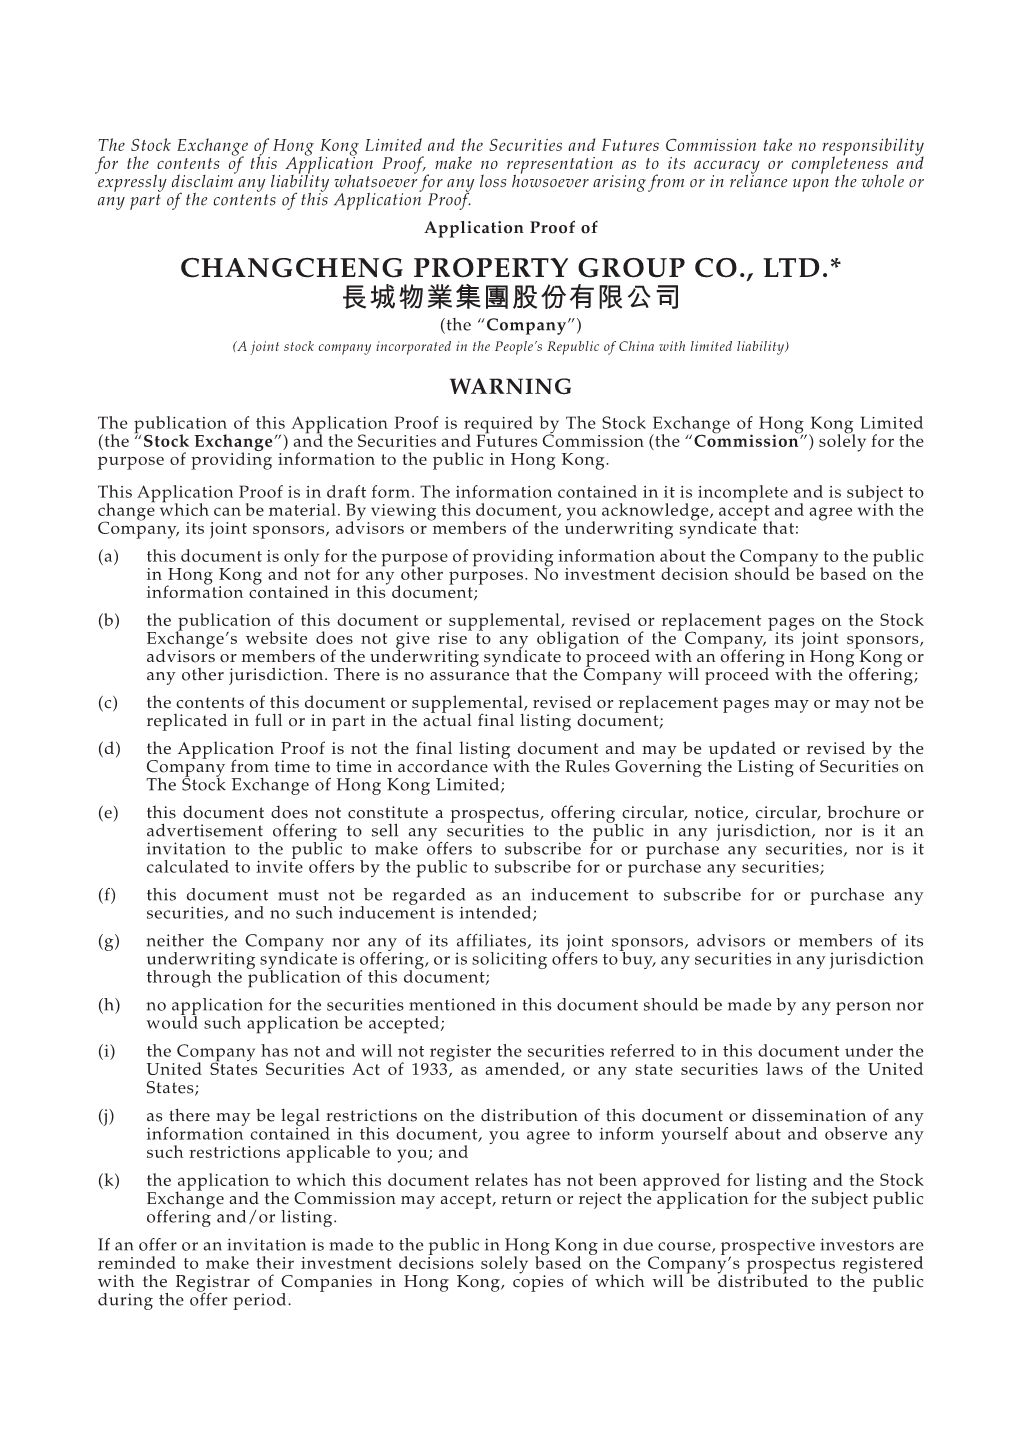 CHANGCHENG PROPERTY GROUP CO., LTD.* 長城物業集團股份有限公司 (The “Company”) (A Joint Stock Company Incorporated in the People’S Republic of China with Limited Liability)